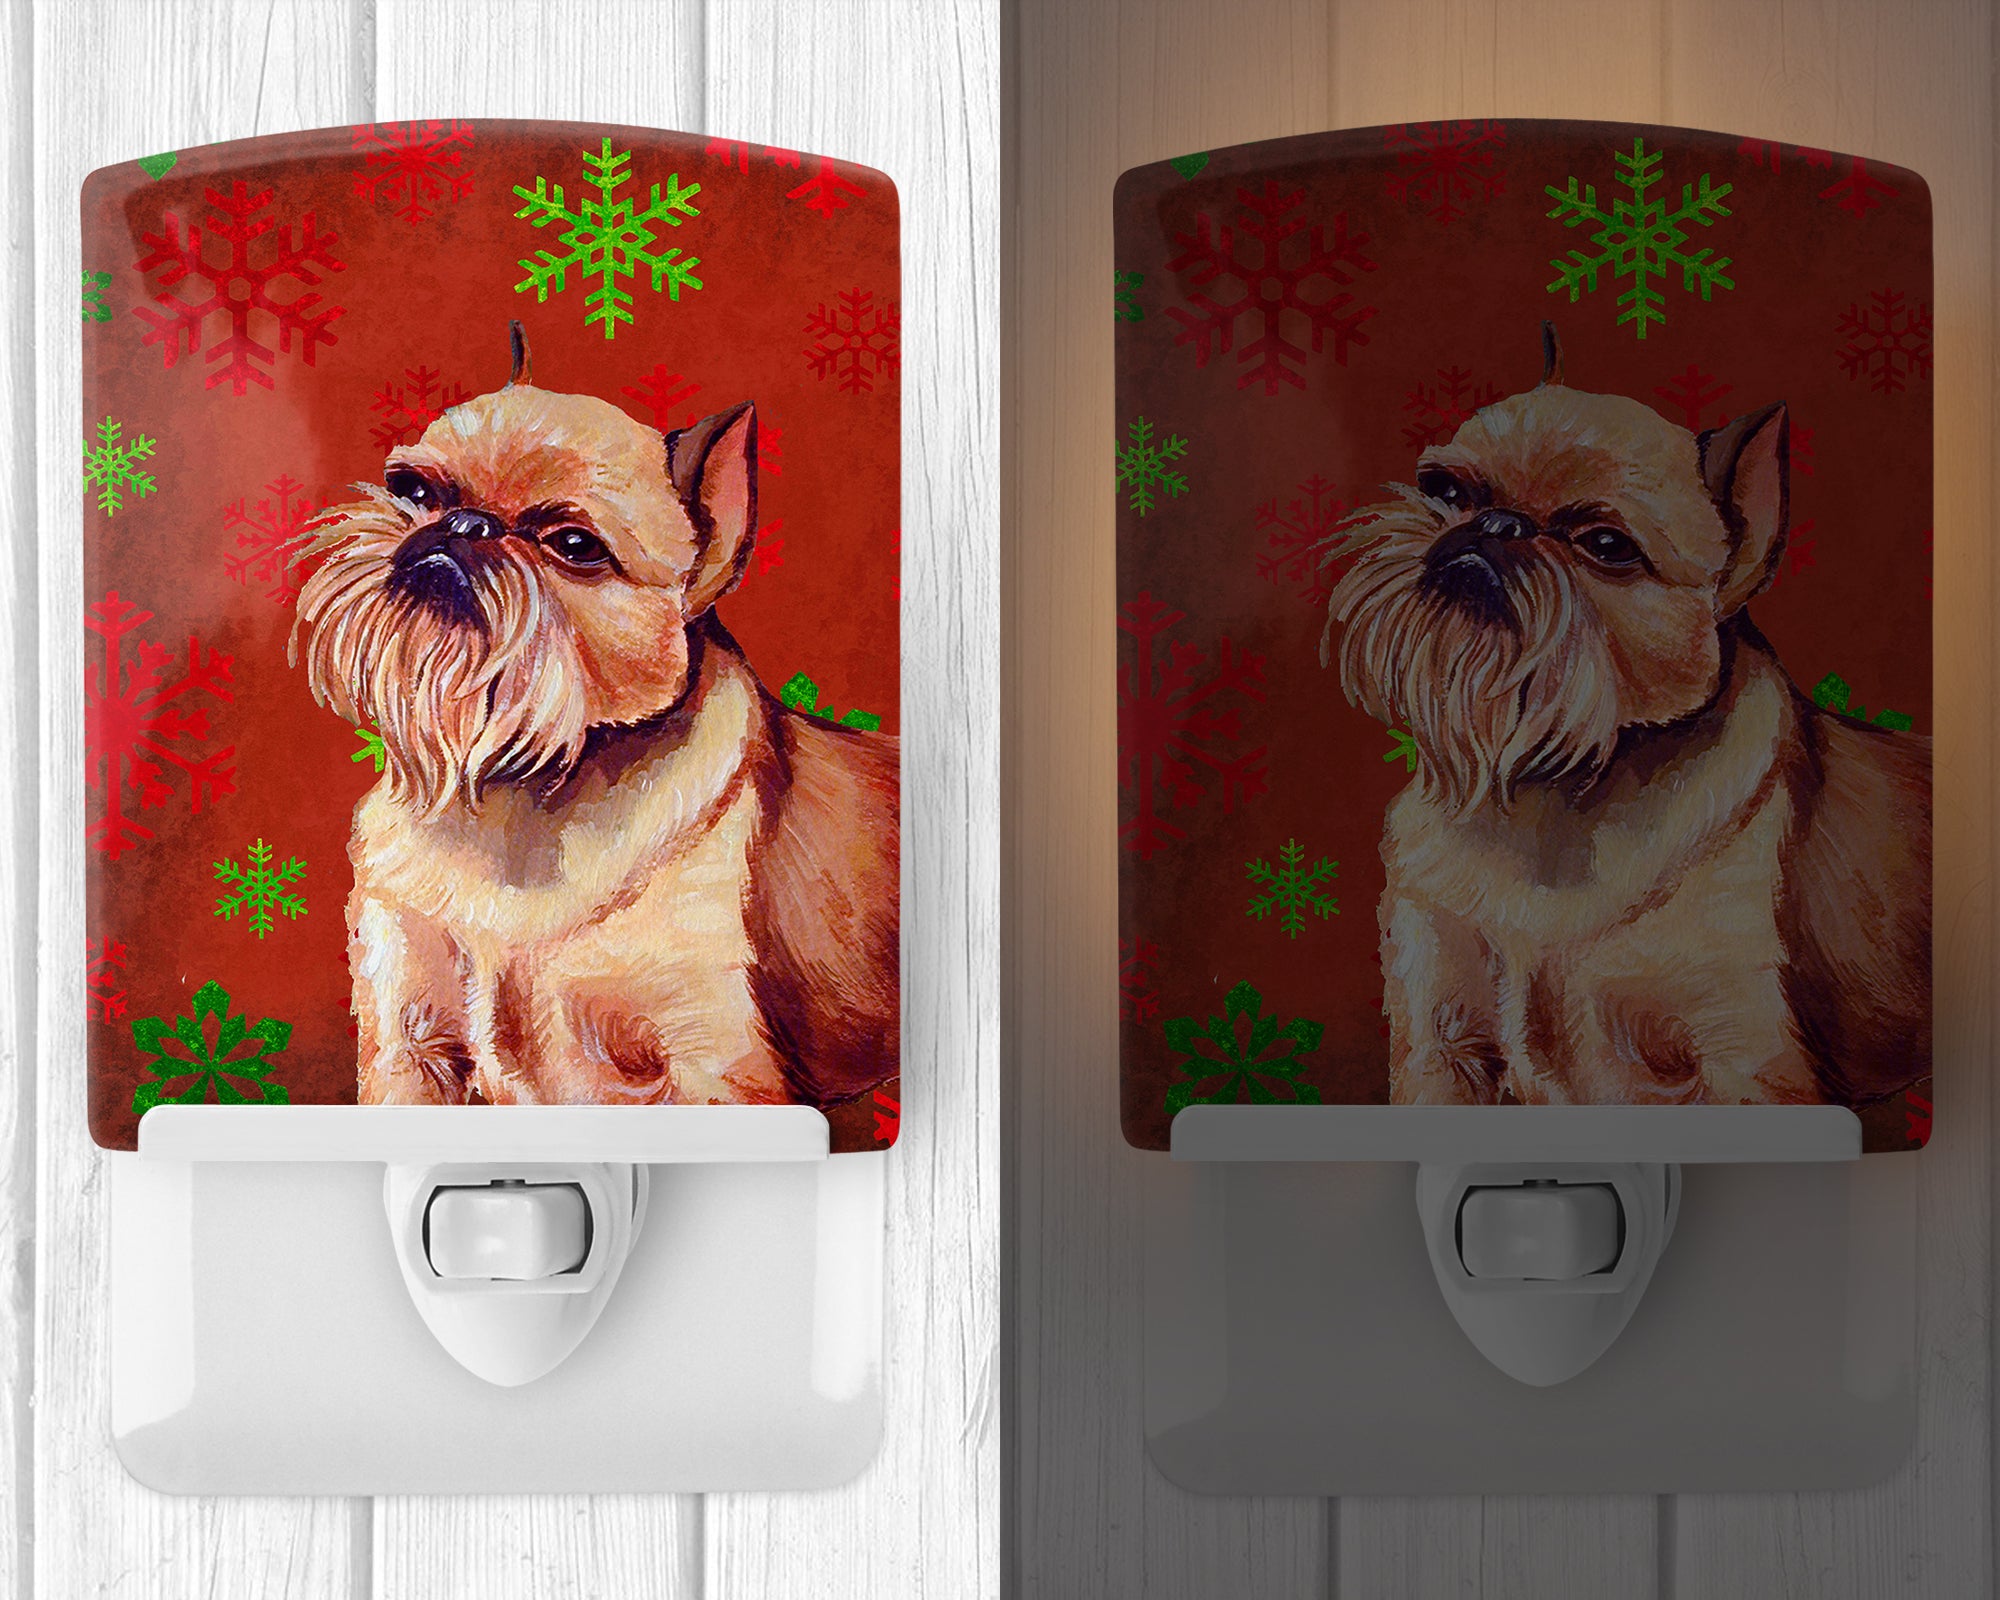 Brussels Griffon Red and Green Snowflakes Holiday Christmas Ceramic Night Light LH9314CNL - the-store.com